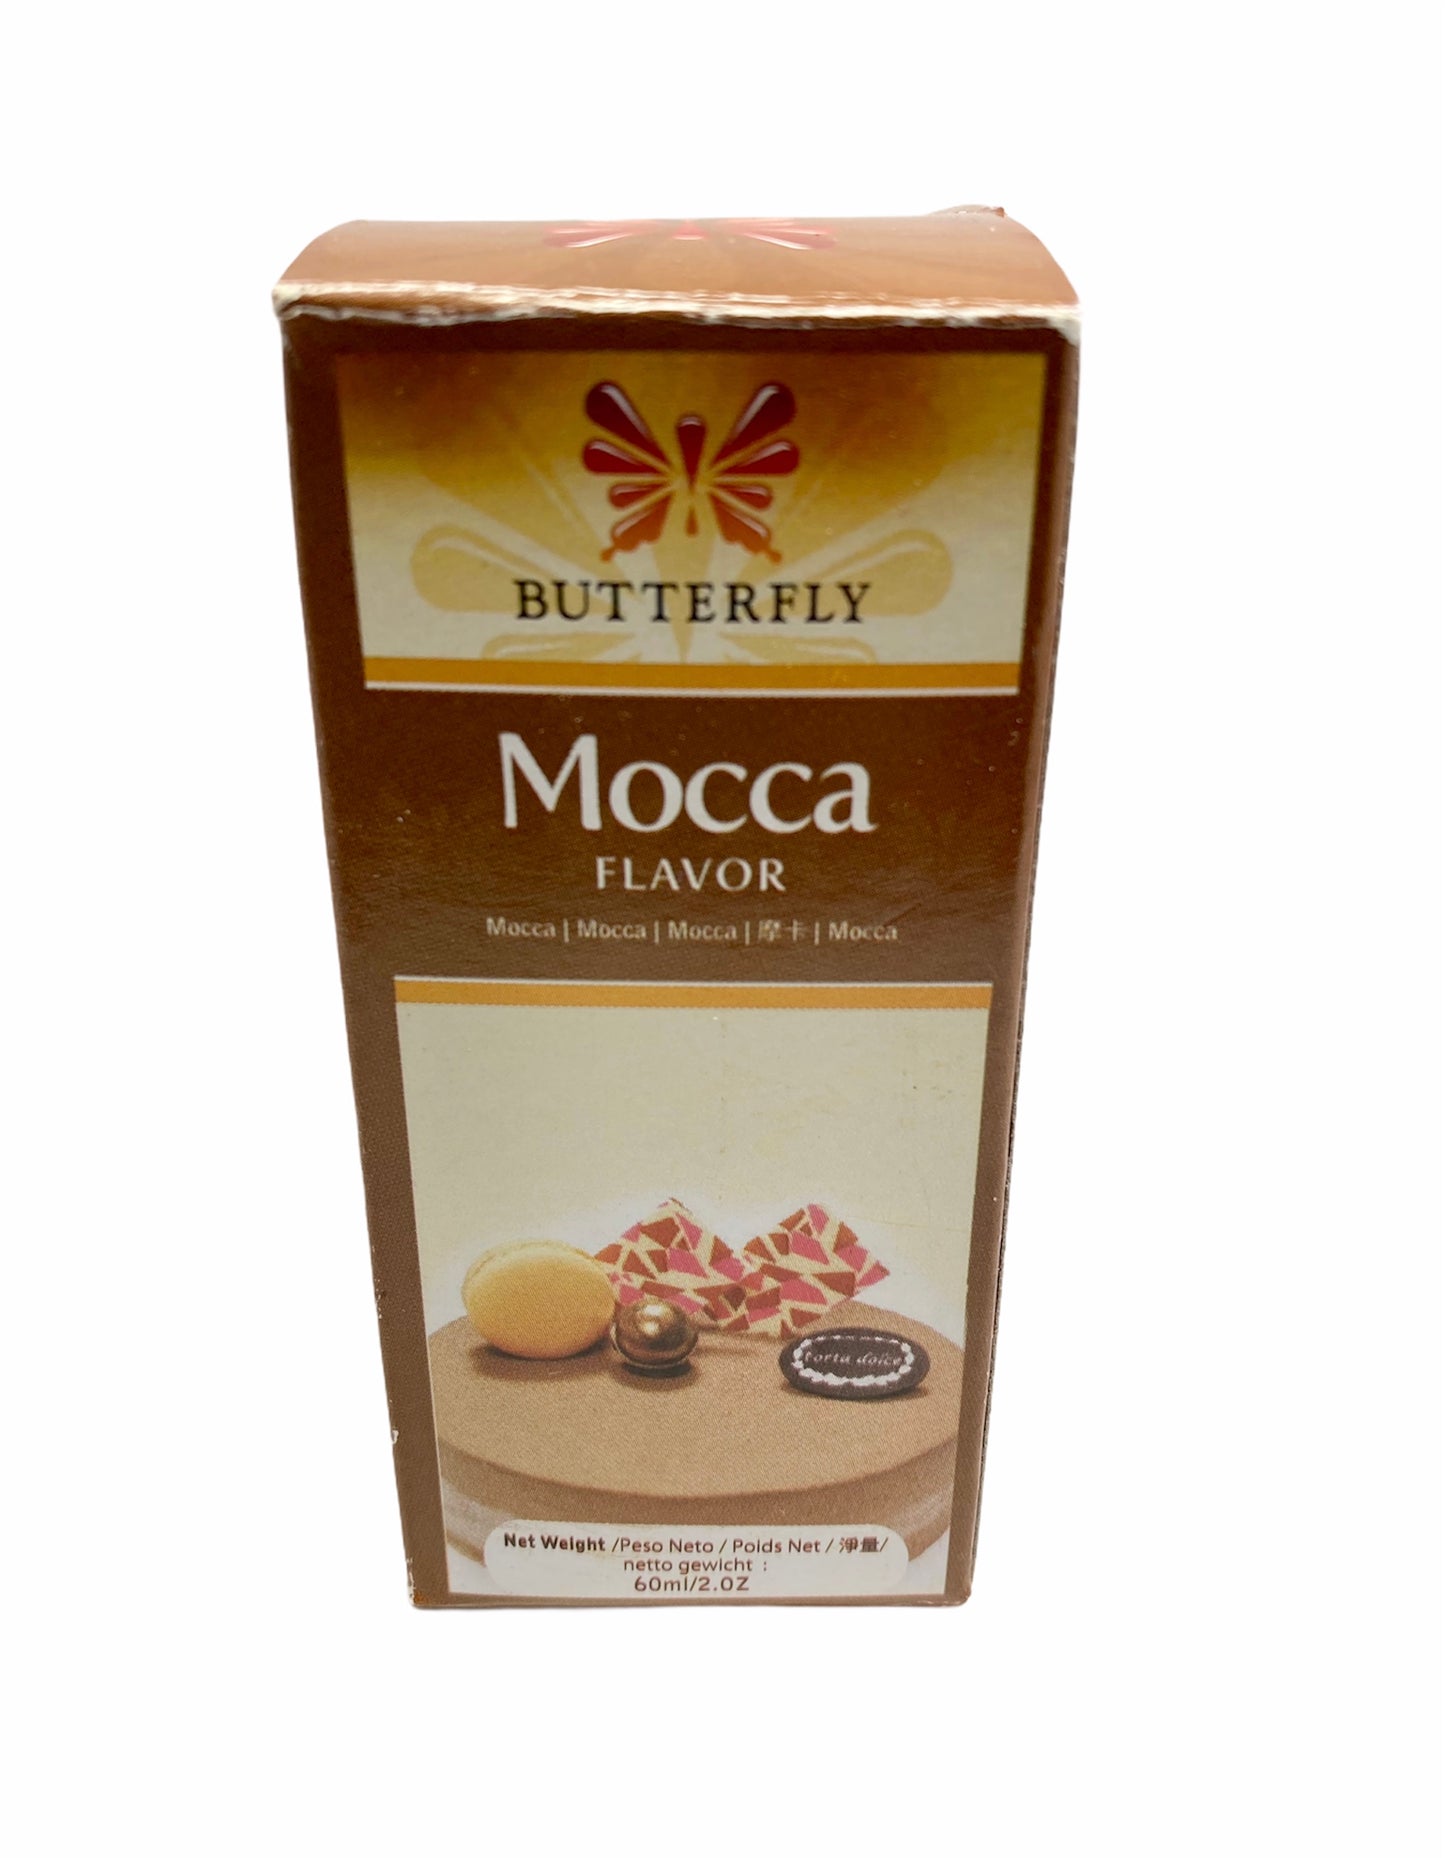 Butterfly Mocca Flavoring Extract 2 Oz. (60 ml)